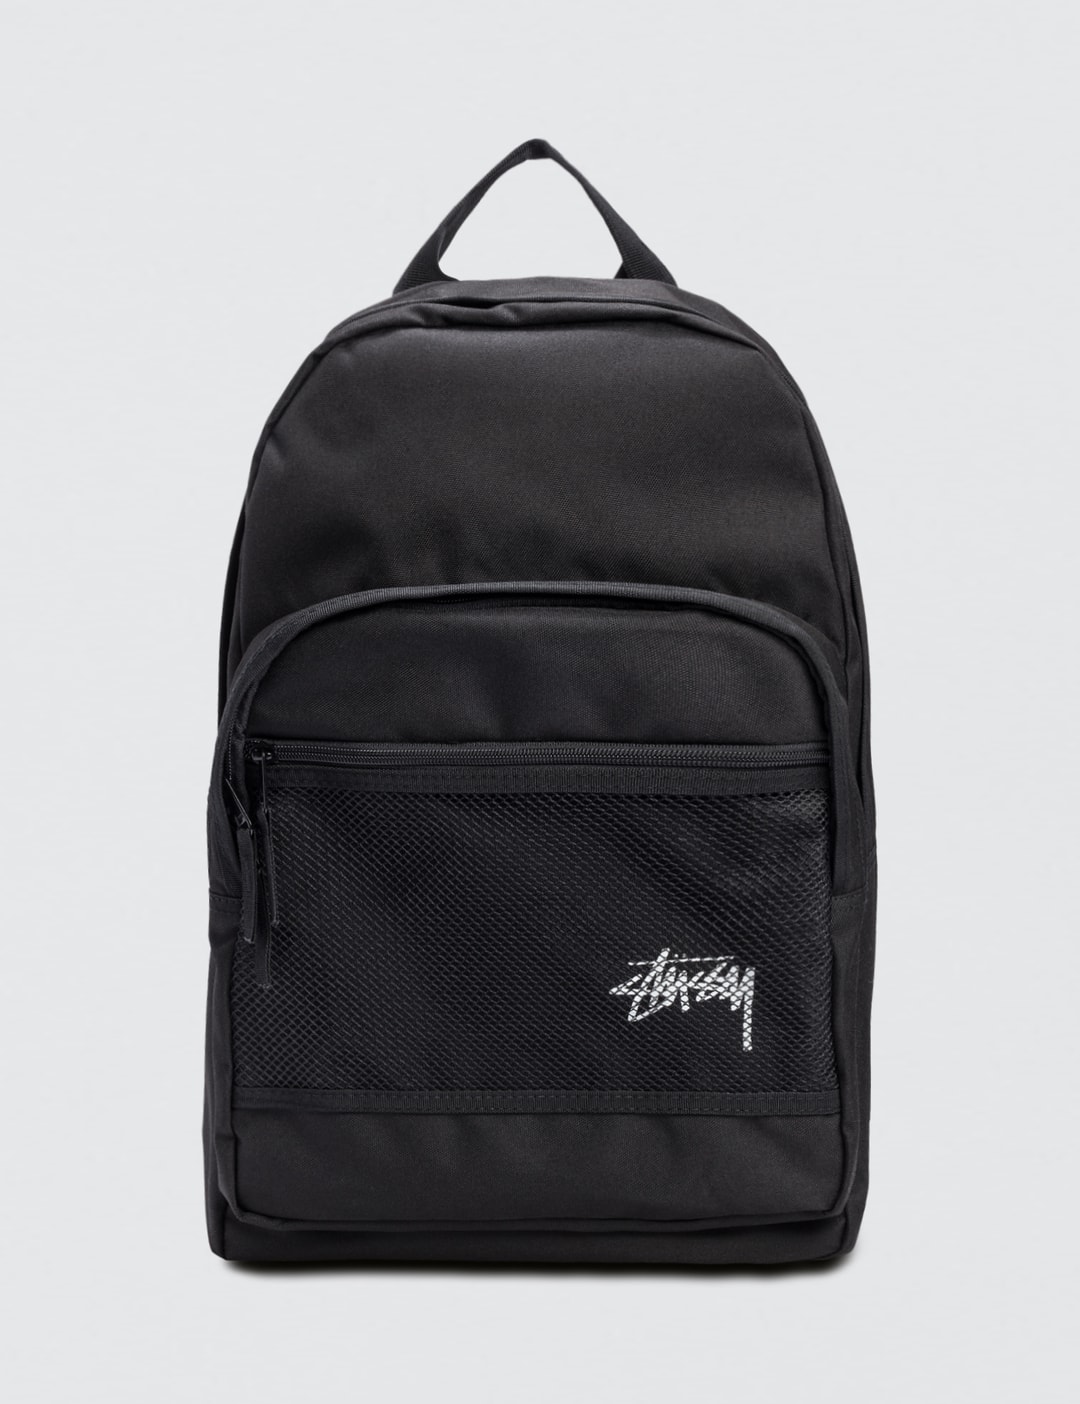 Stüssy - Stock Backpack | HBX - Globally Curated Fashion and Lifestyle ...